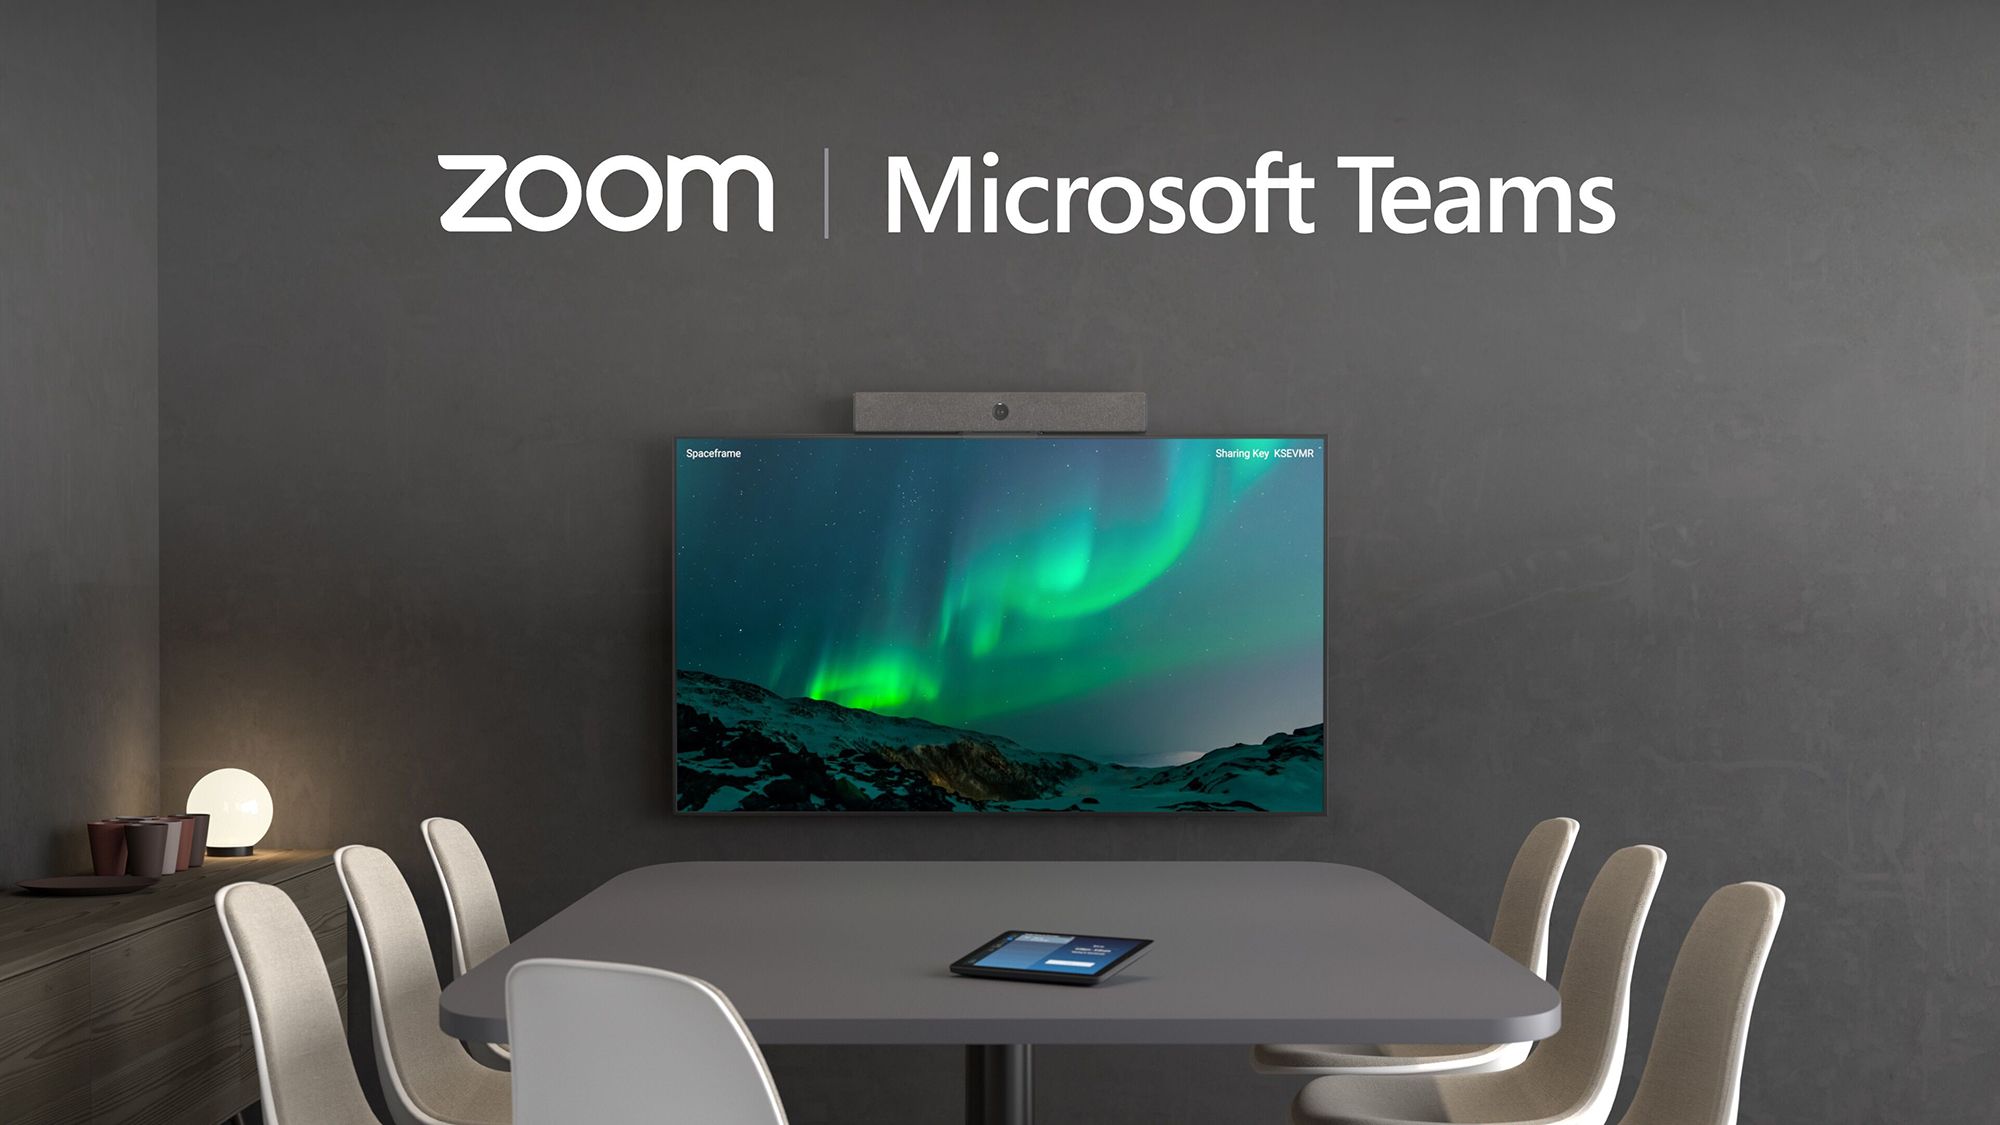 Zoom Rooms Direct Guest Join Capability for Microsoft Teams Meetings